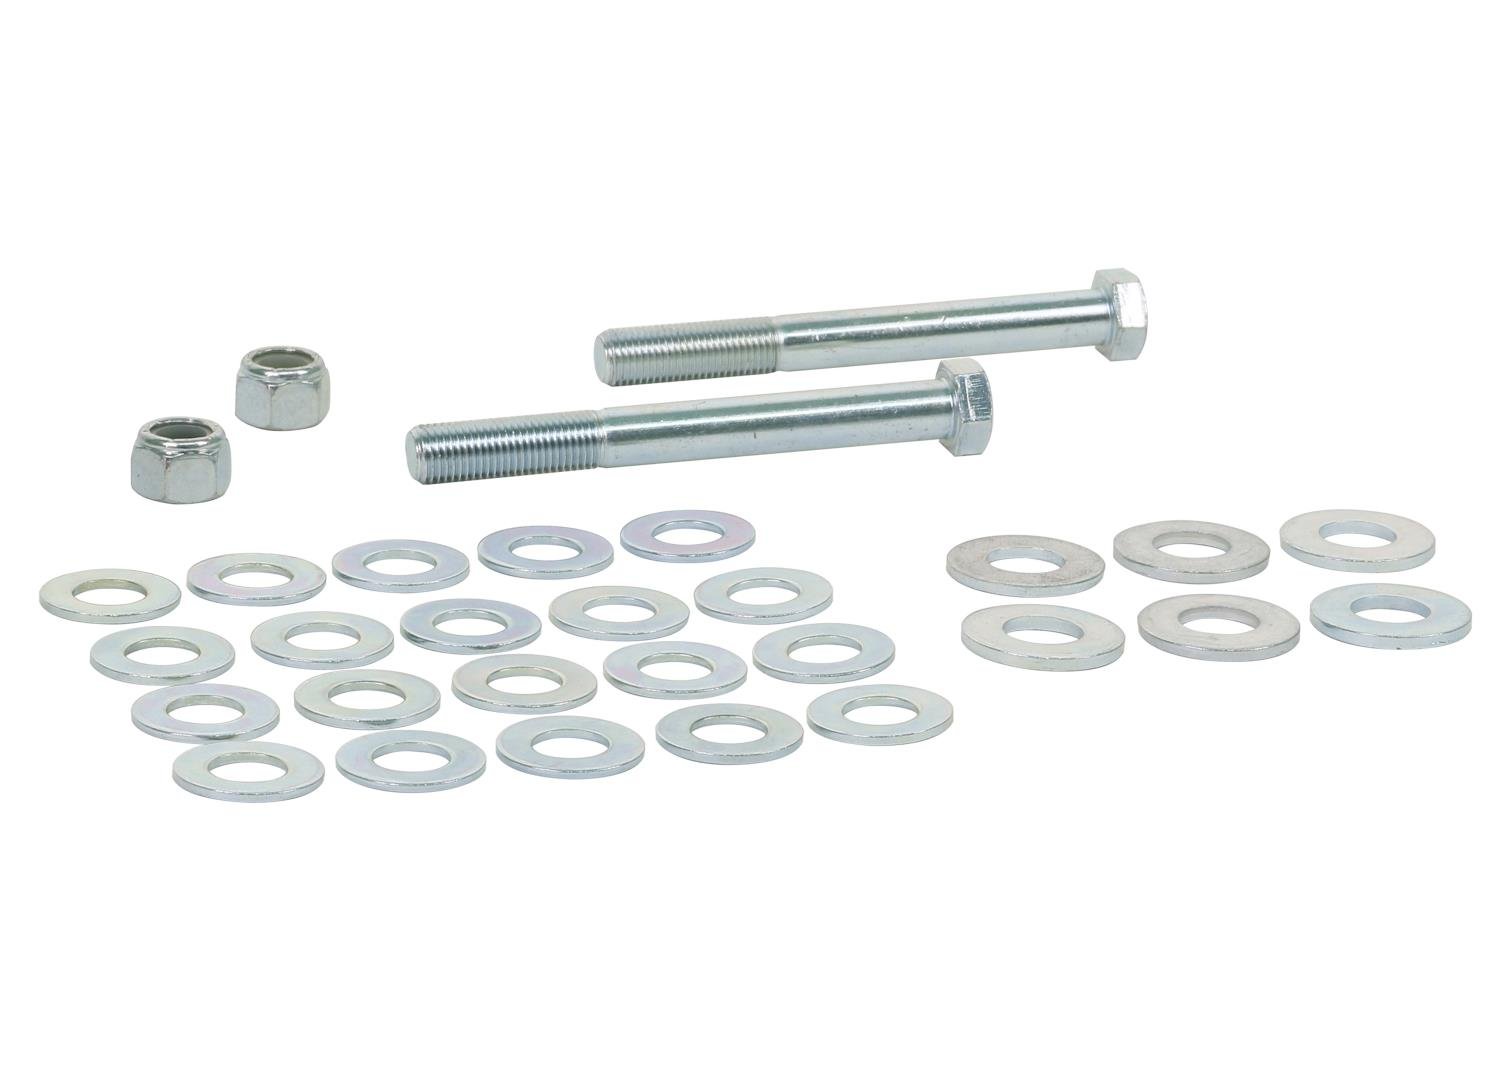 KCA301 Front Control Arm Lower Inner Front Bolt Kit Fits Select 1991-2001 Acura, Honda Models